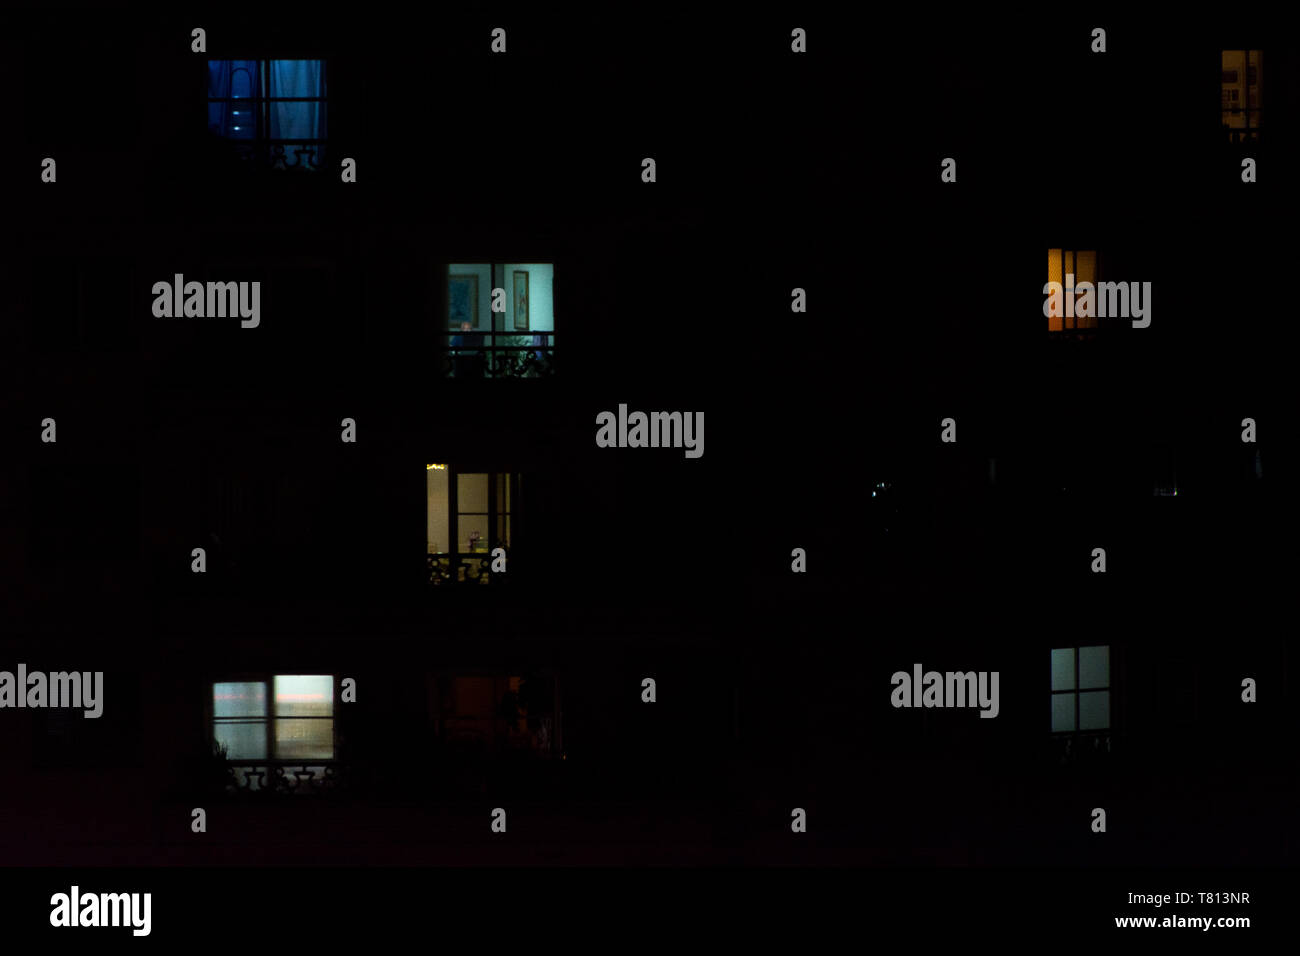 2019, May - Sao Paulo, Brazil. Multiple windows of an apartment building at night. Some yellow, some blue, some light on, some light off. Stock Photo